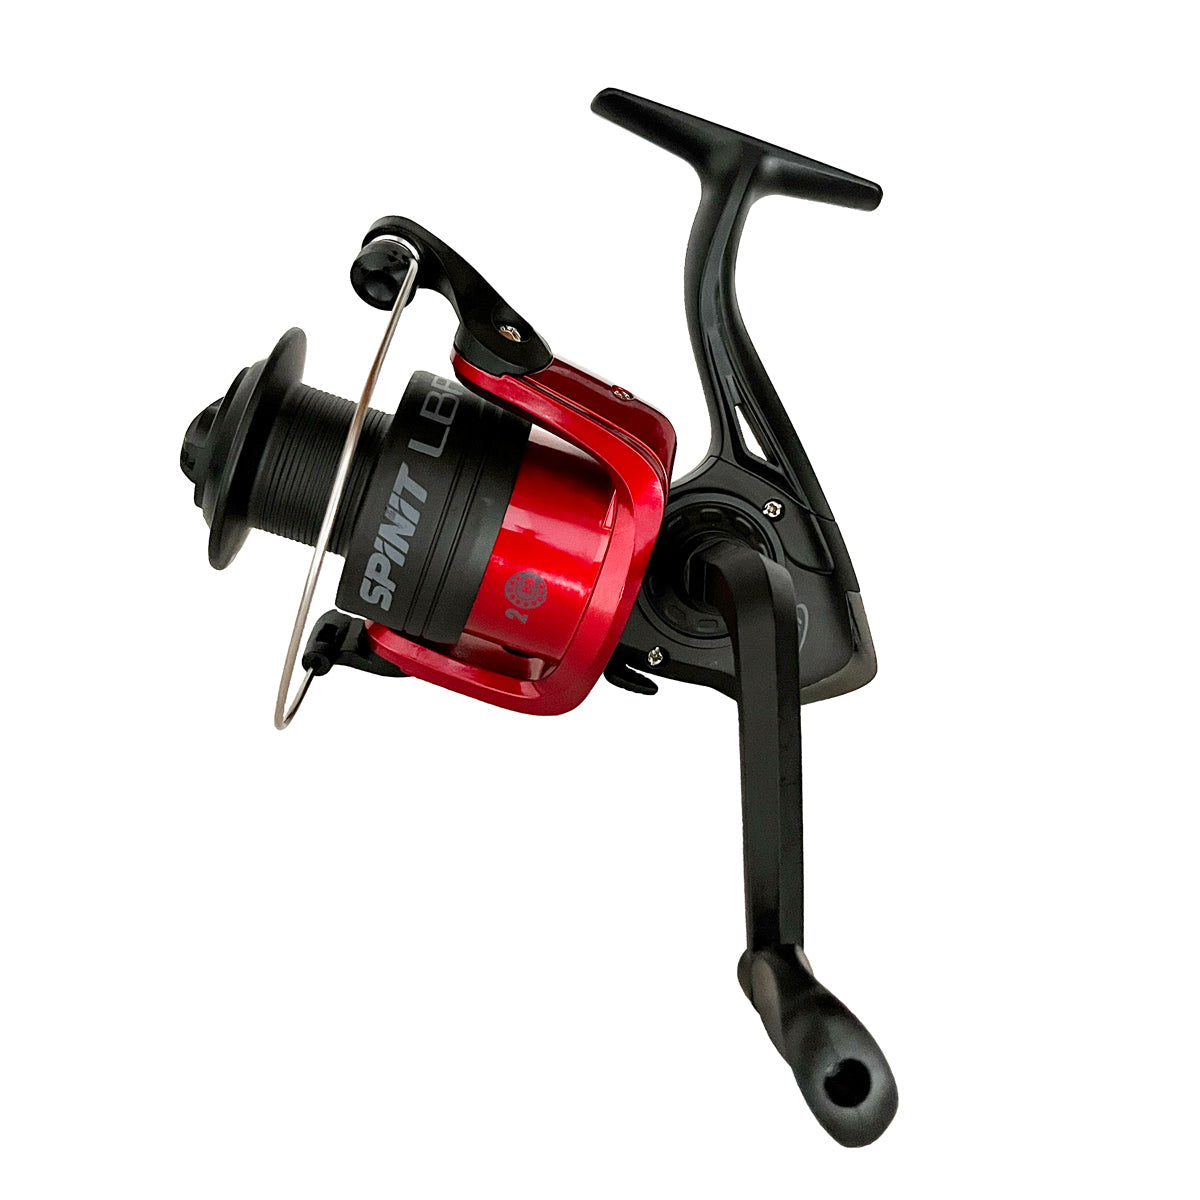 Reel frontal LBR 302 Spinning – Spinit